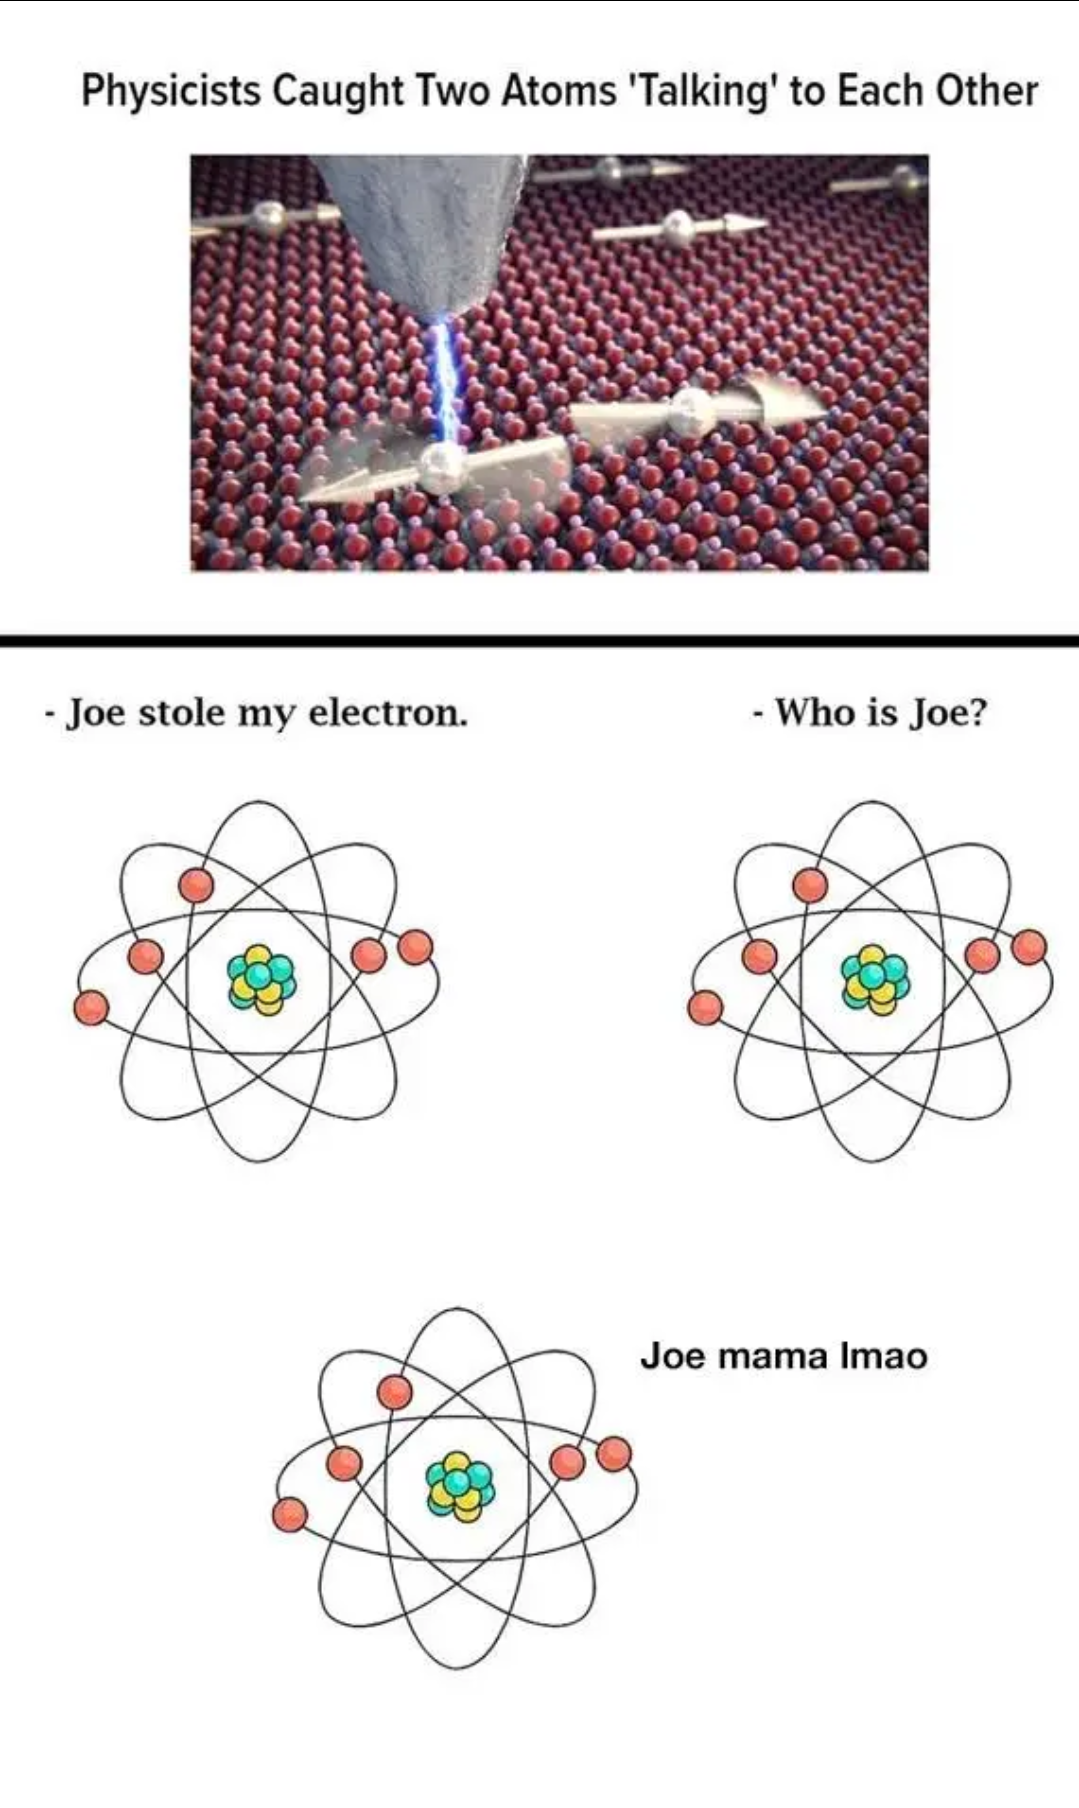 dank memes and funny pics - design - Physicists Caught Two Atoms 'Talking' to Each Other Joe stole my electron. Who is Joe? Joe mama Imao